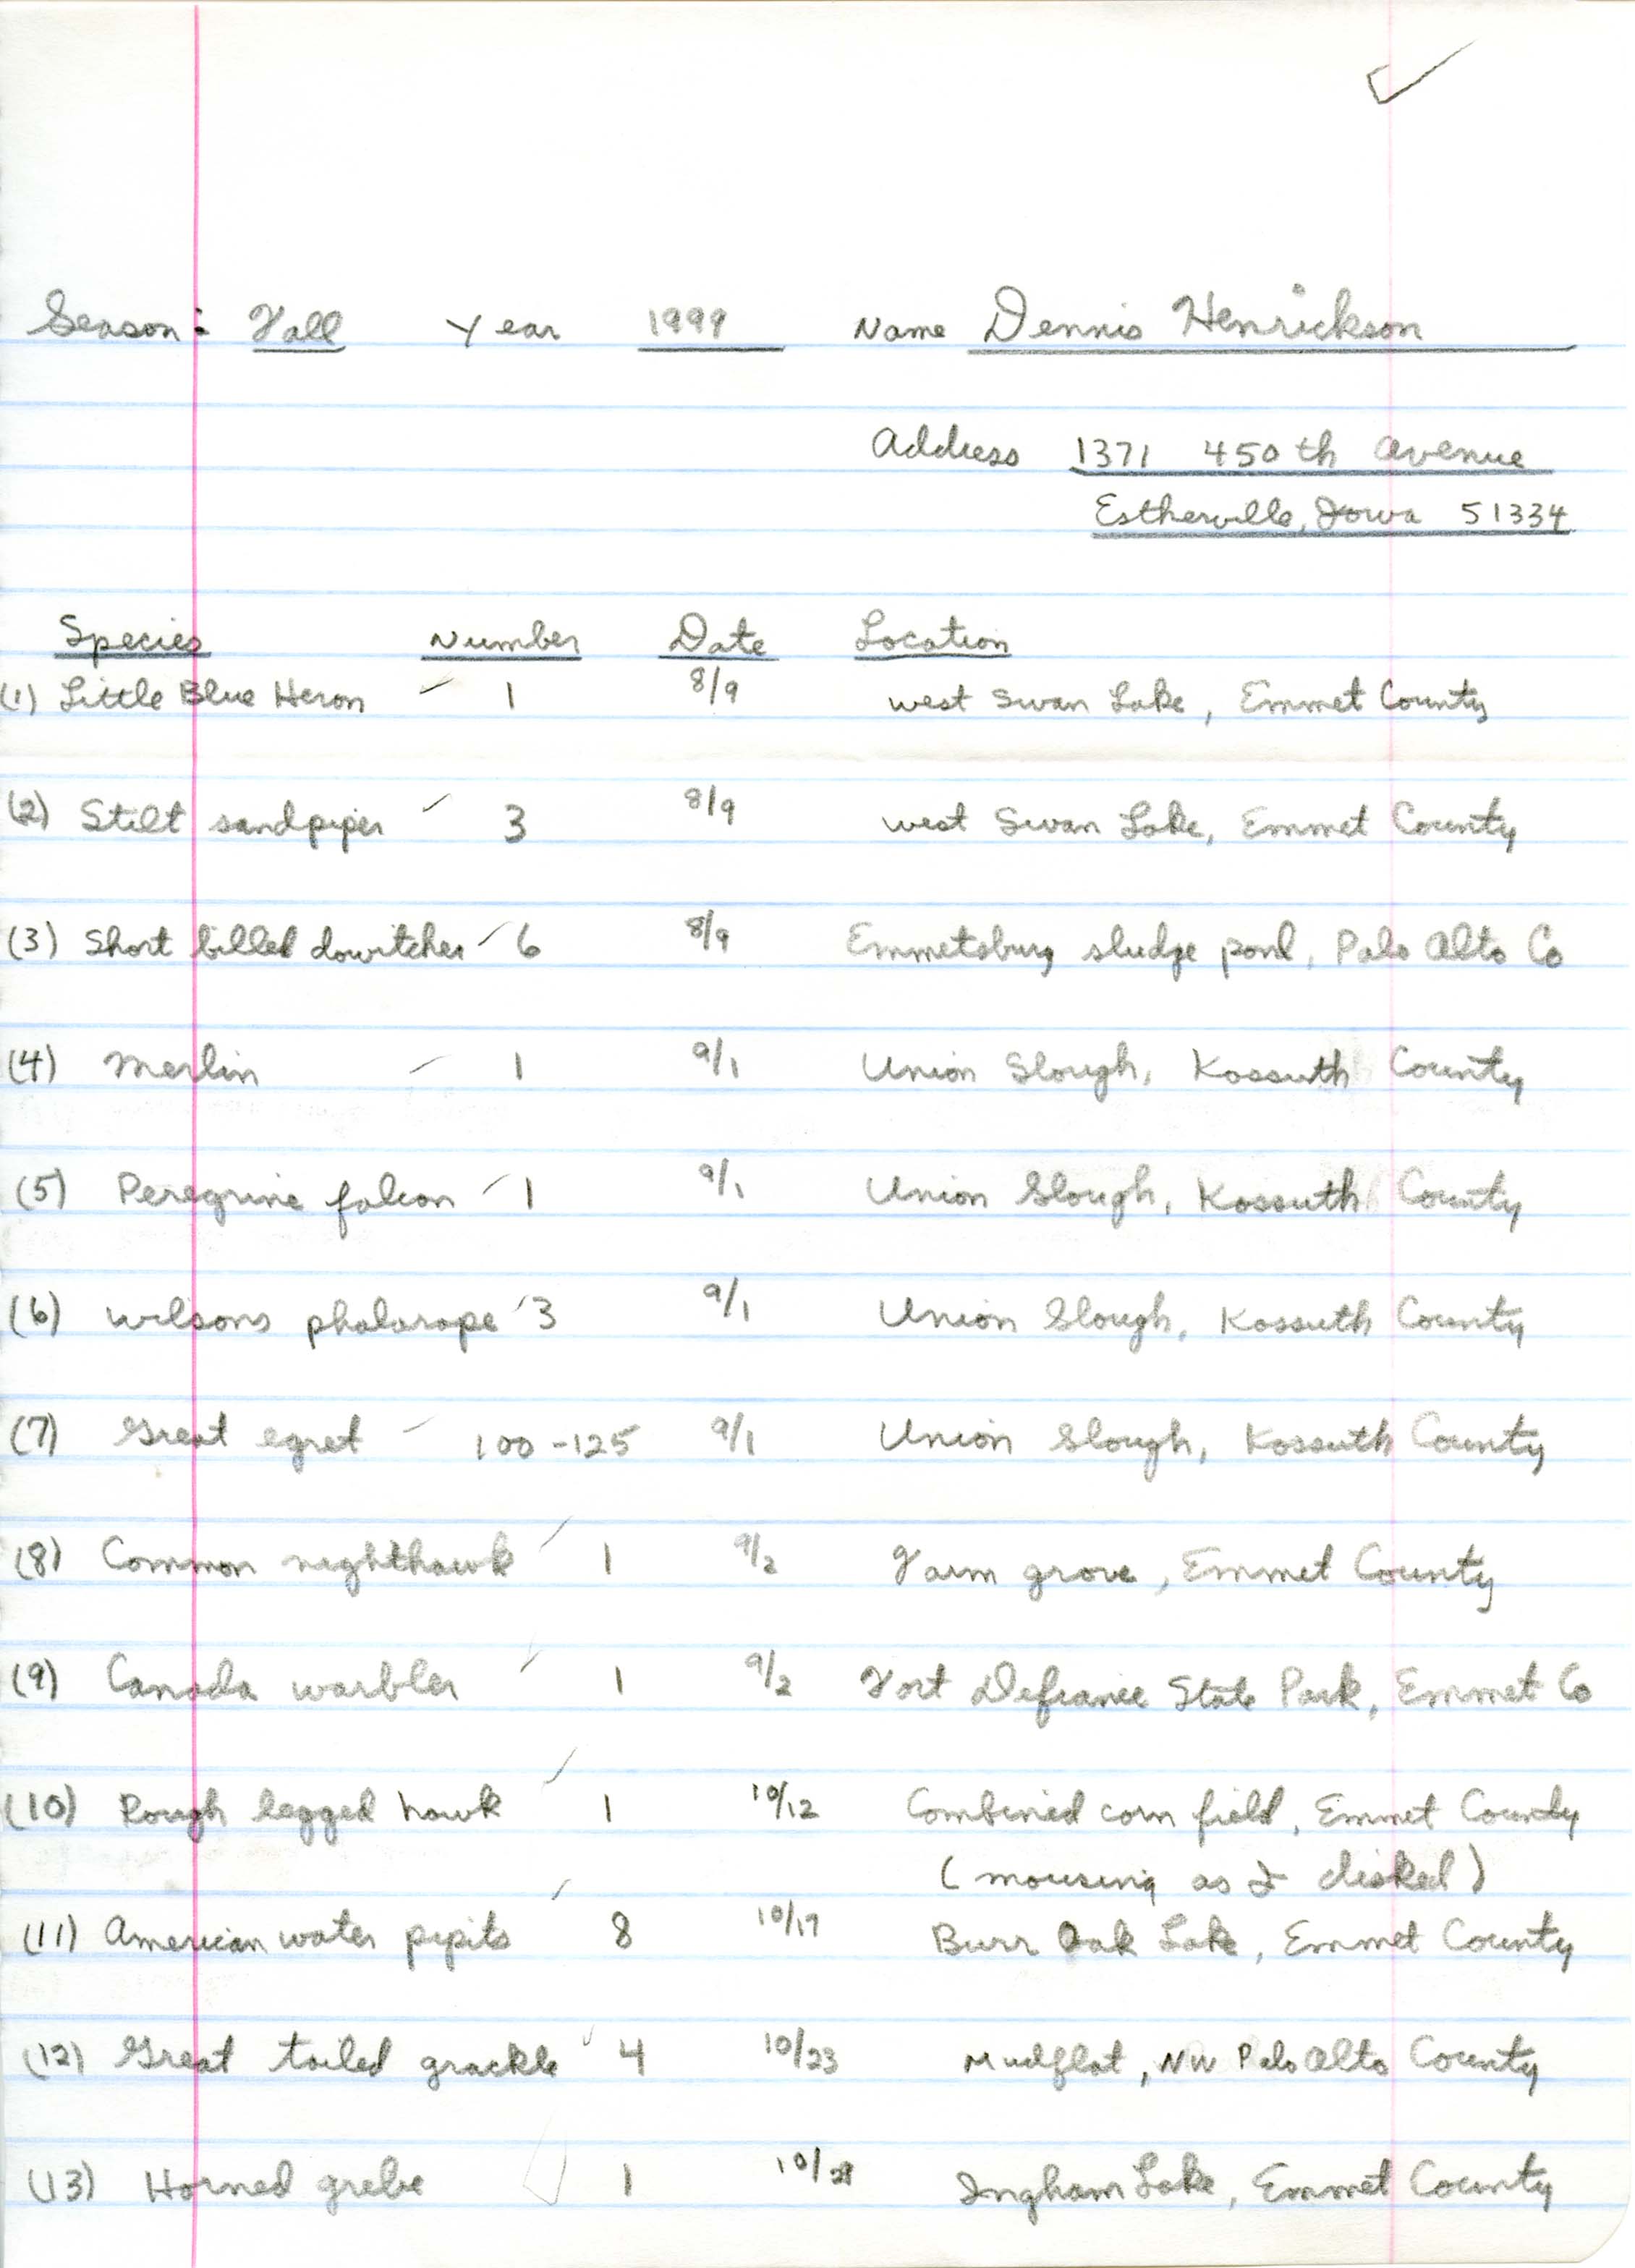 Annotated bird sighting list for fall 1999 compiled by Dennis Henrickson